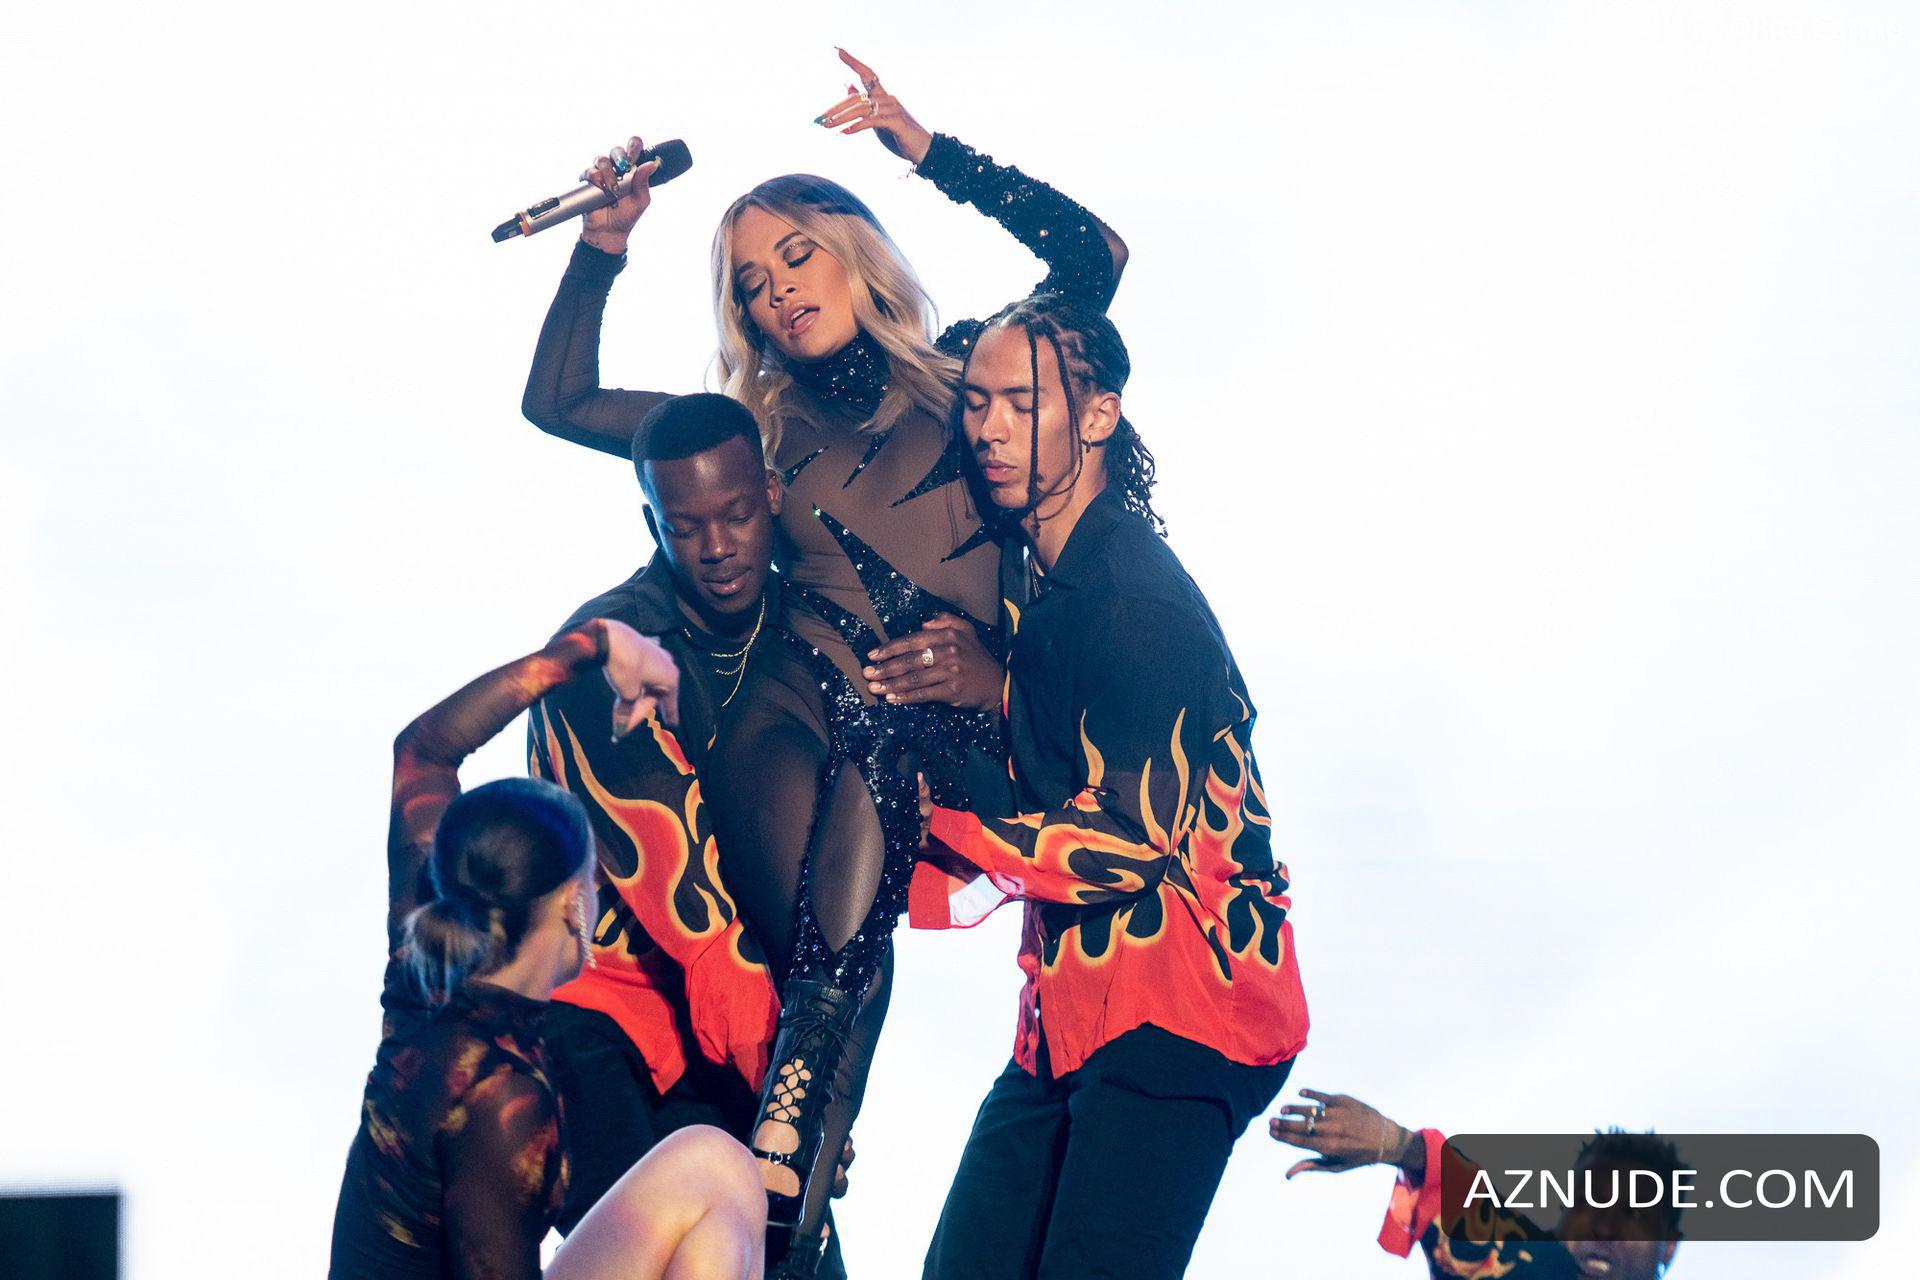 Rita Ora Sexy Performs At The 23rd Edition Of The Meo Sudoeste Festival